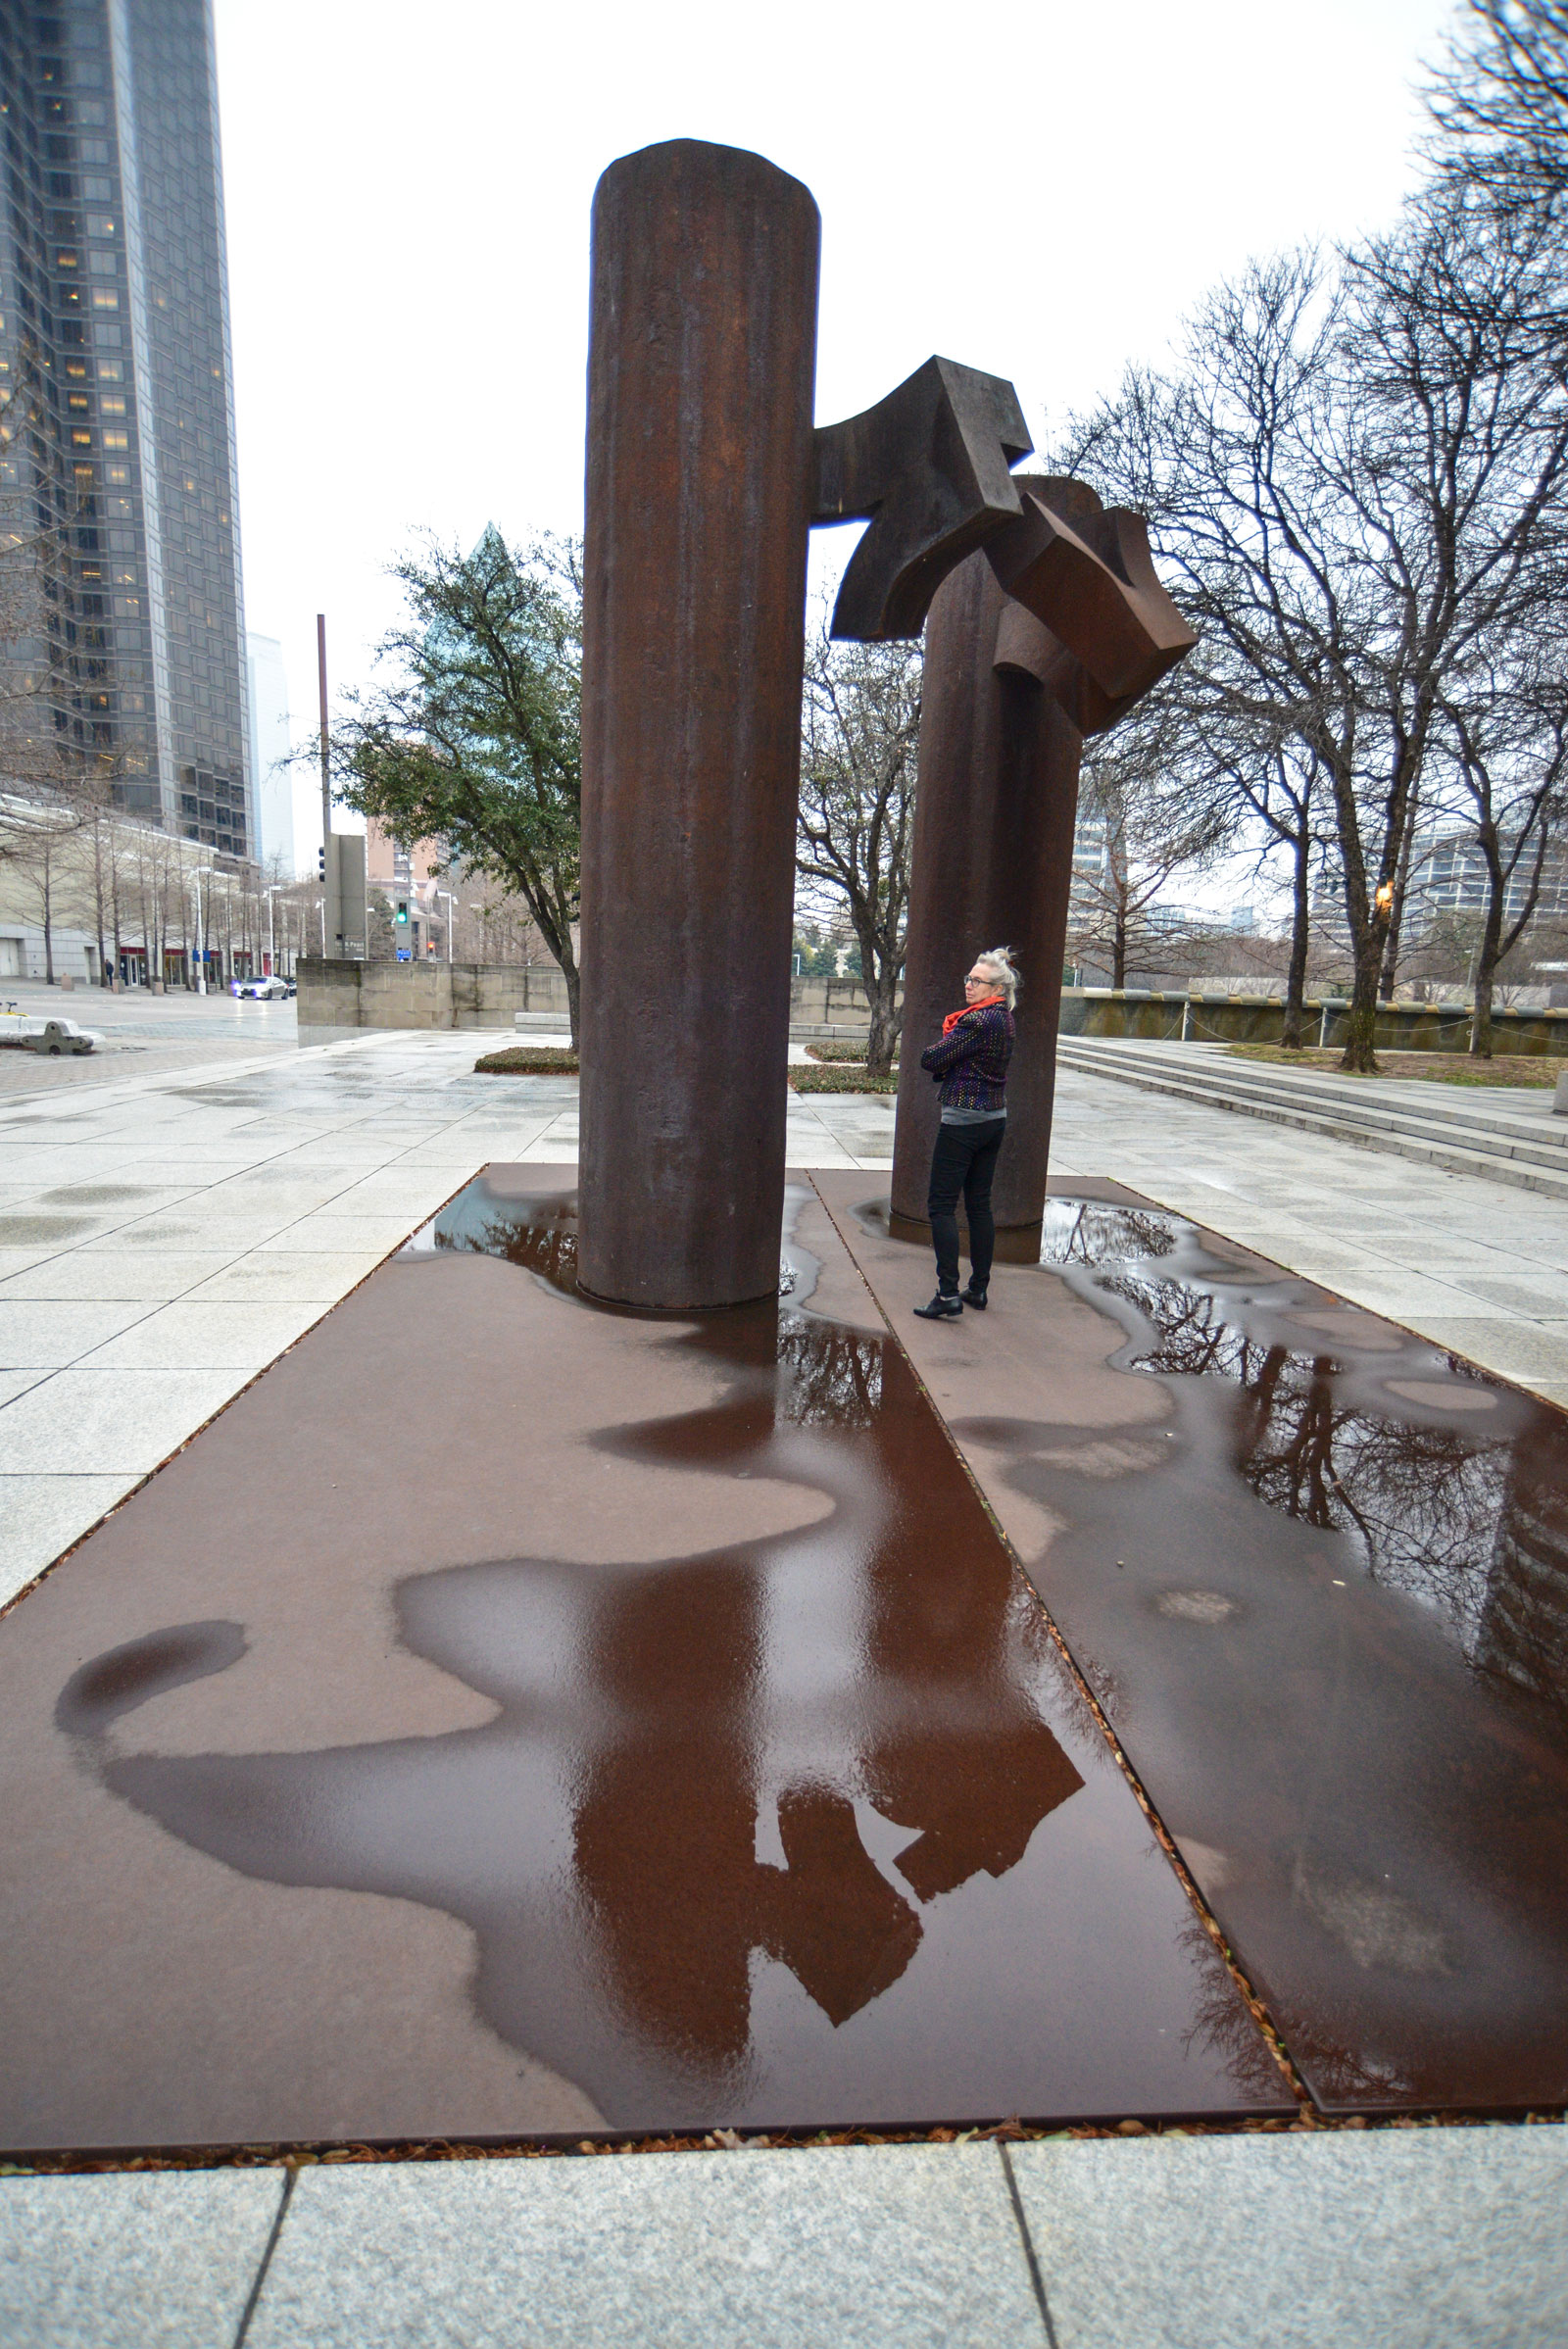 After the rain Terry stands near the Chillida sculpture outside the Meyerson Hall, Dallas, Tx